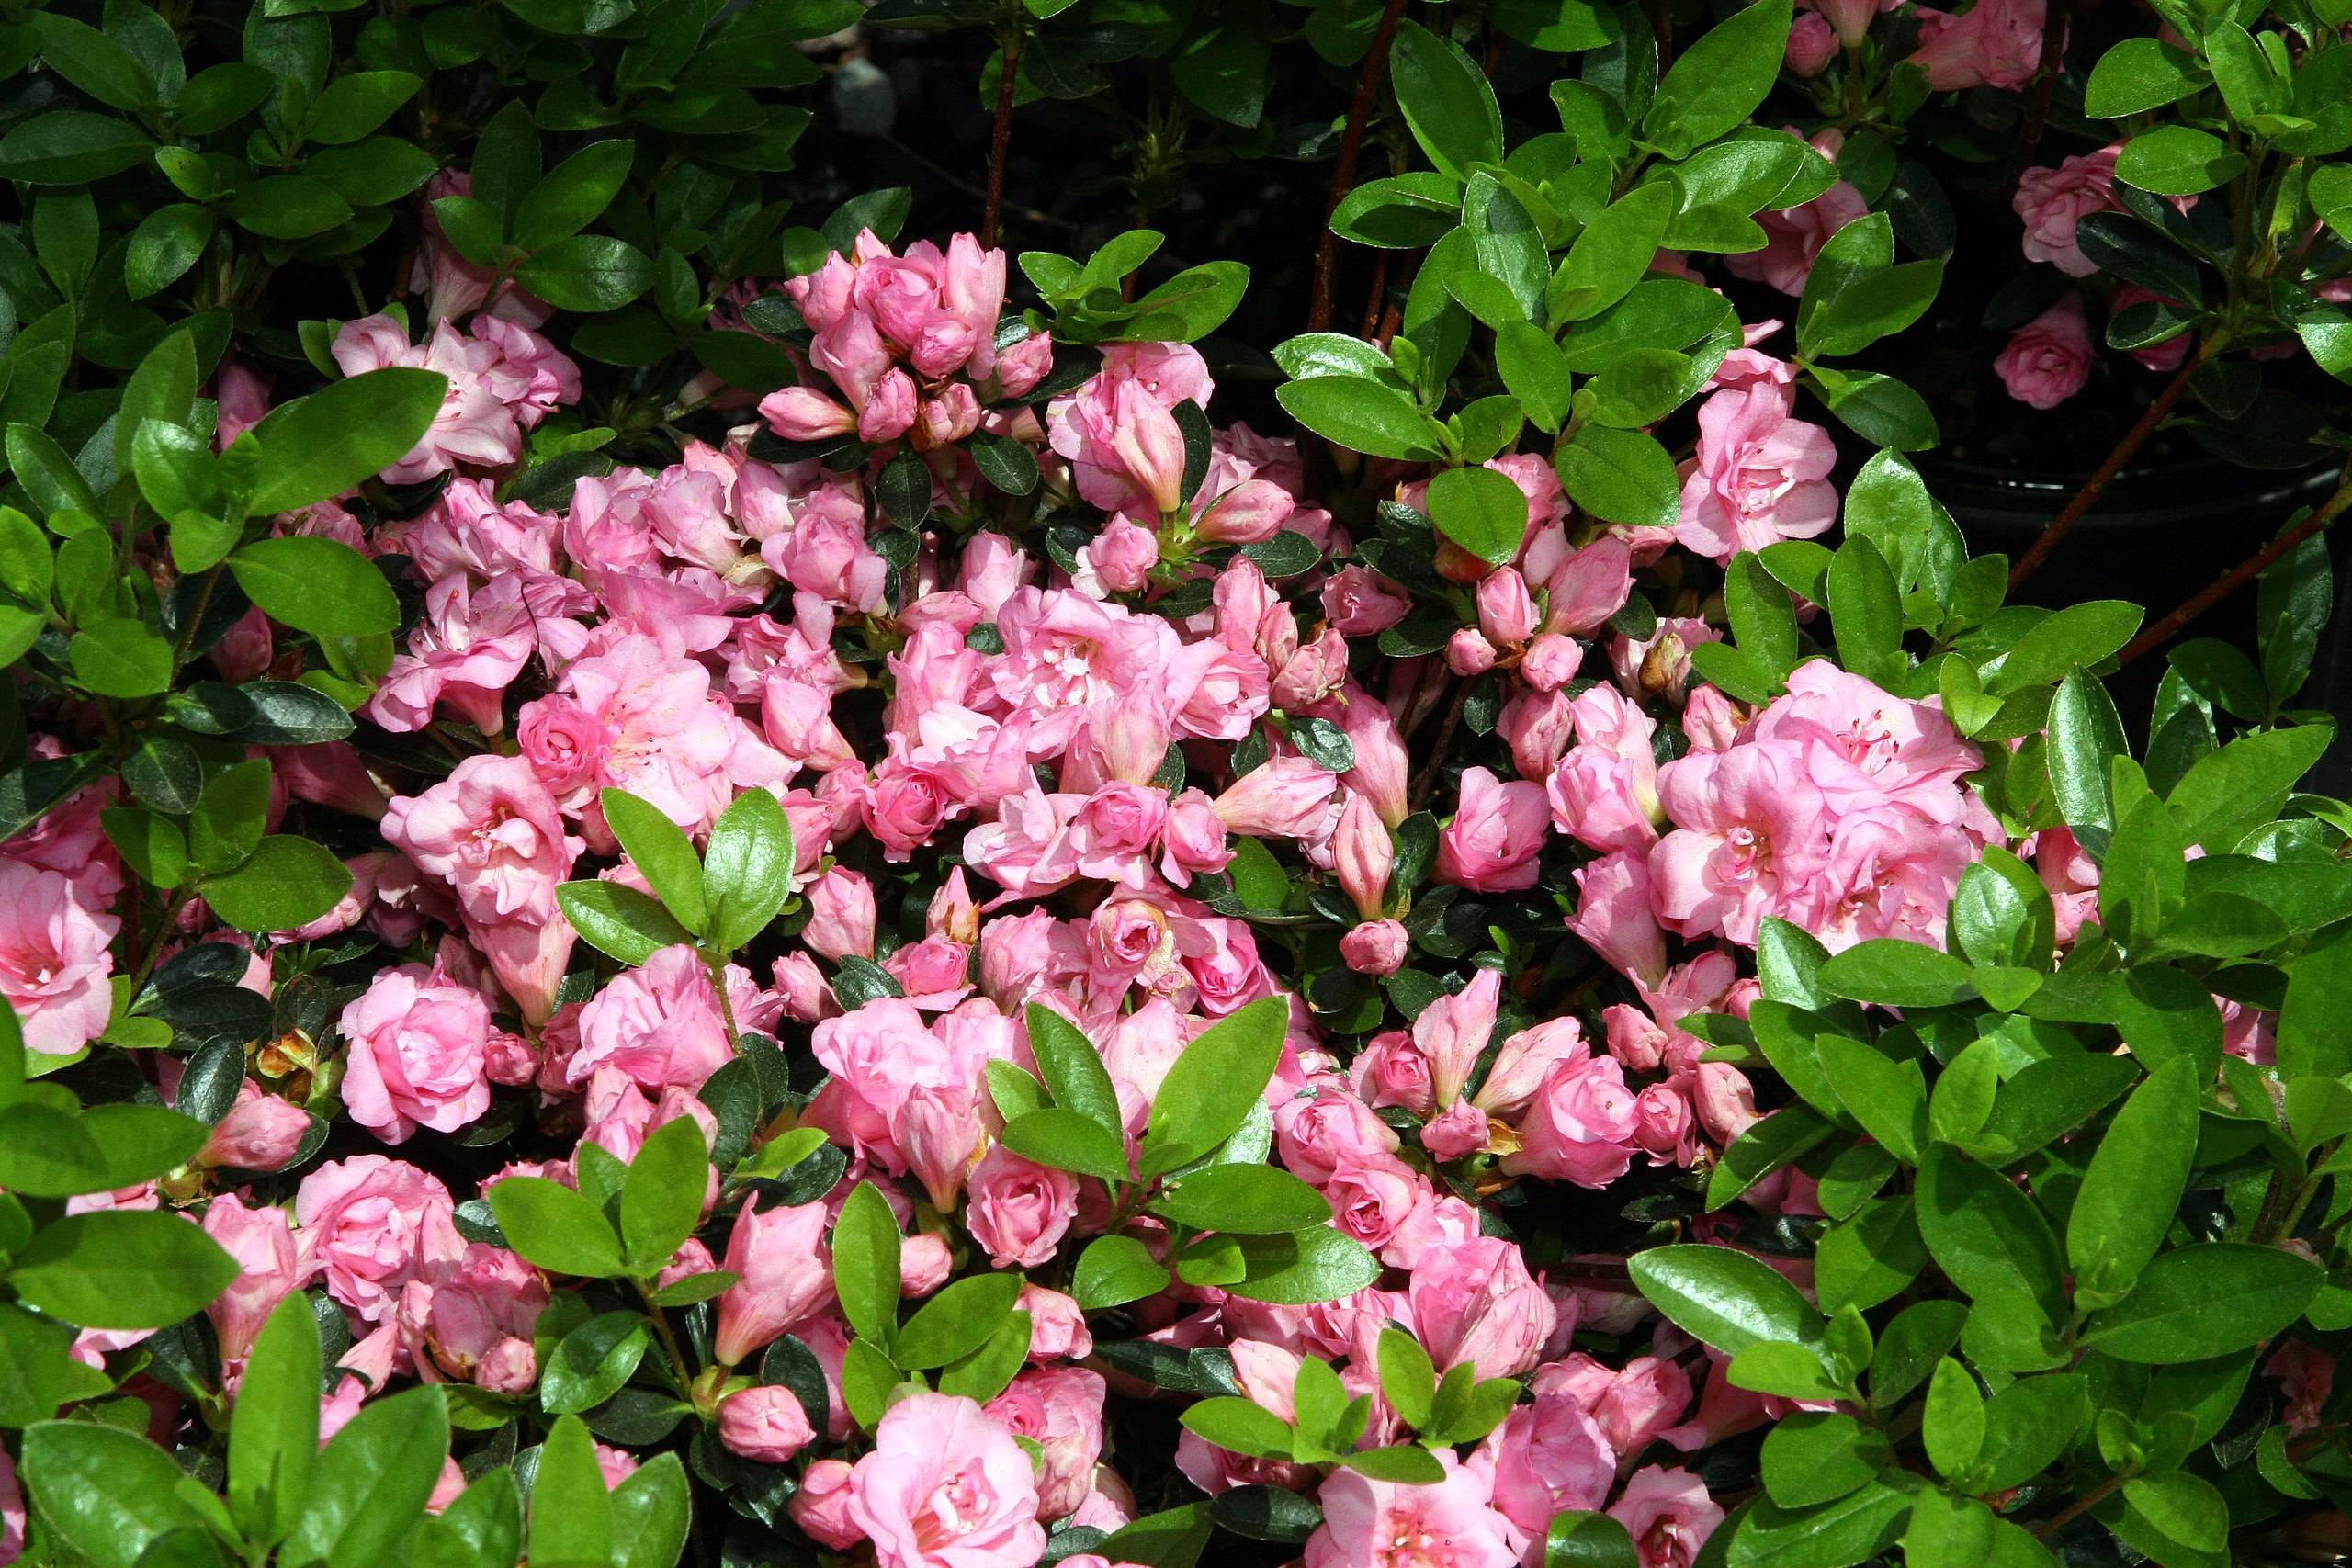 light-pink flowers and buds with green stems and  lime-green leaves